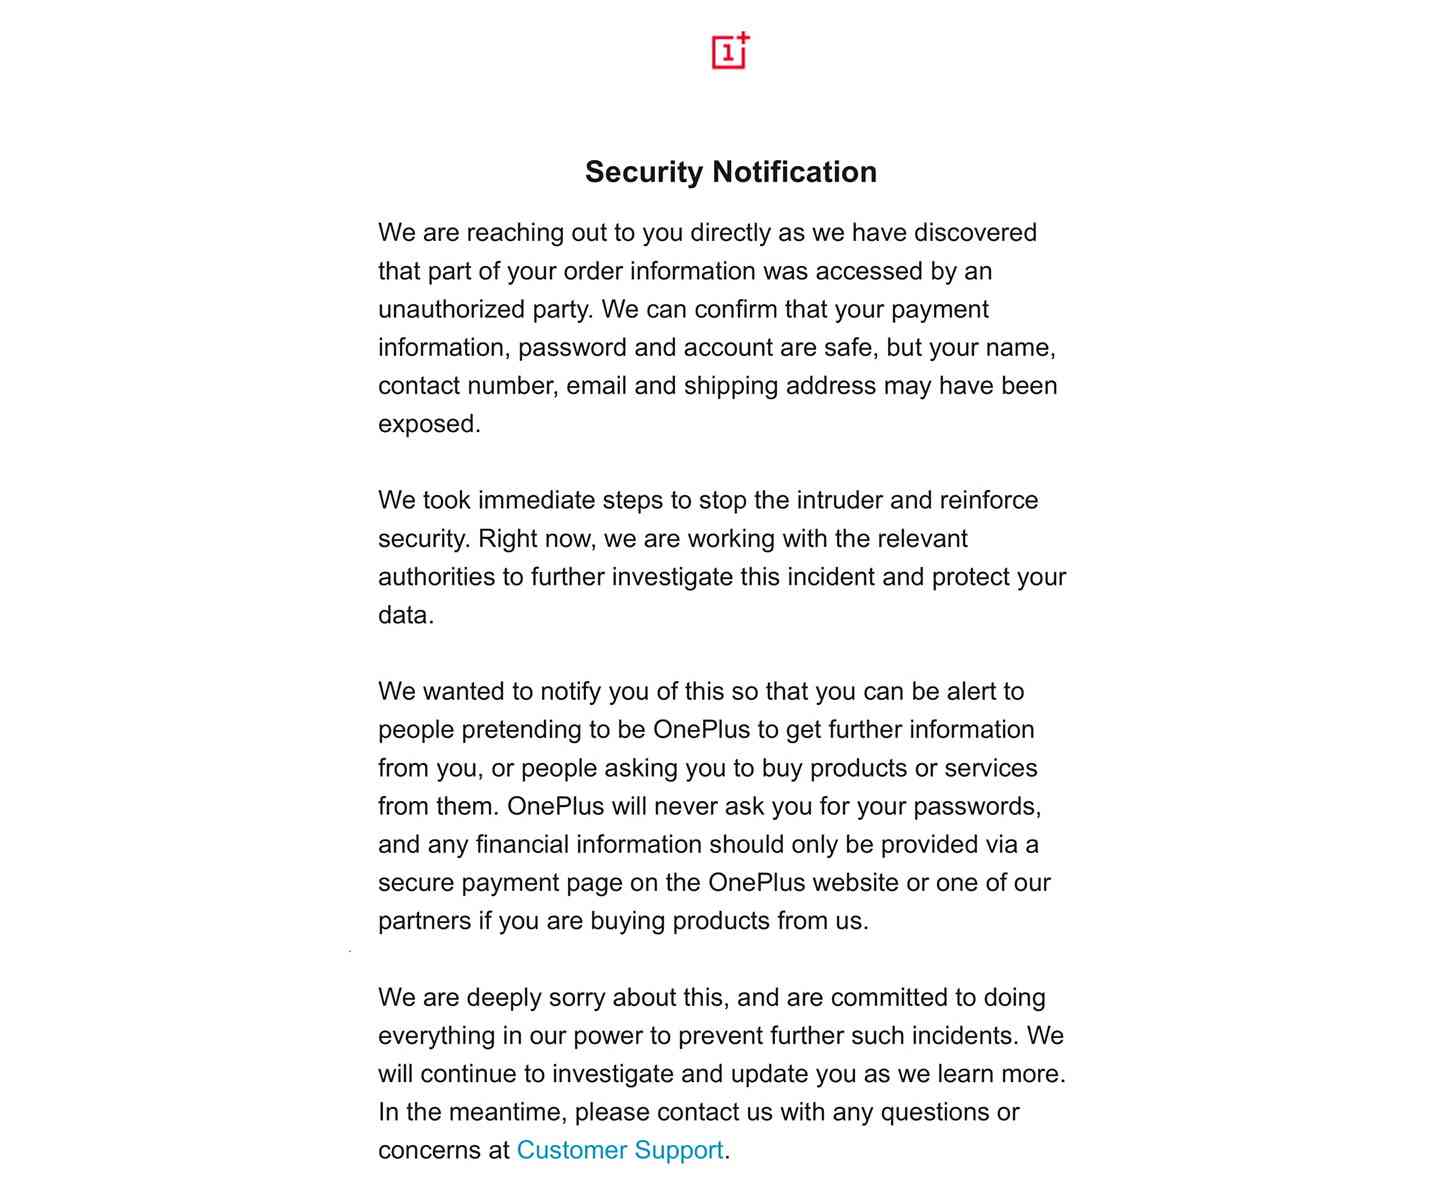 OnePlus security breach email